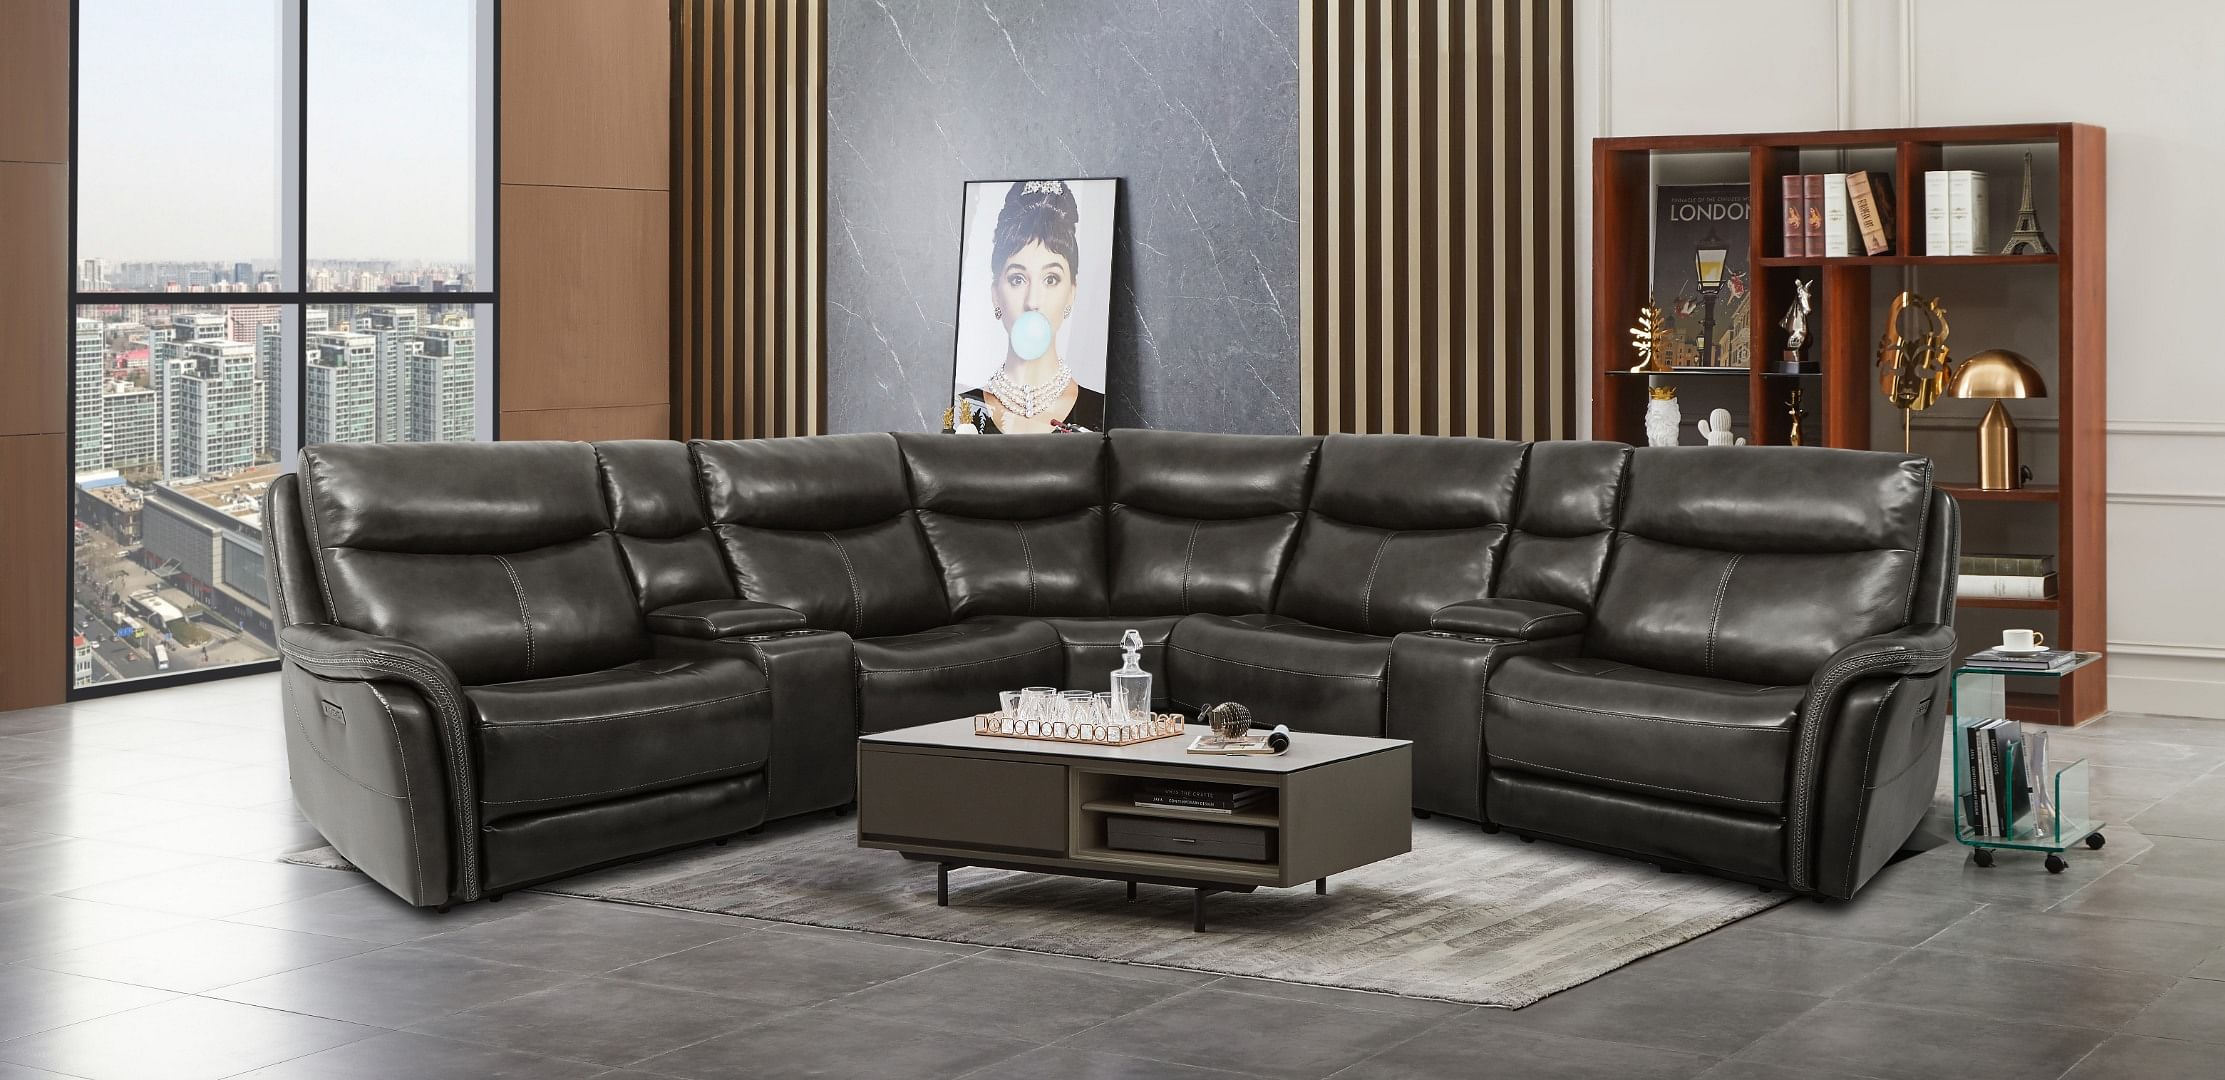 London 7pc Leather Reclining Sectional with 3 Power Recliners